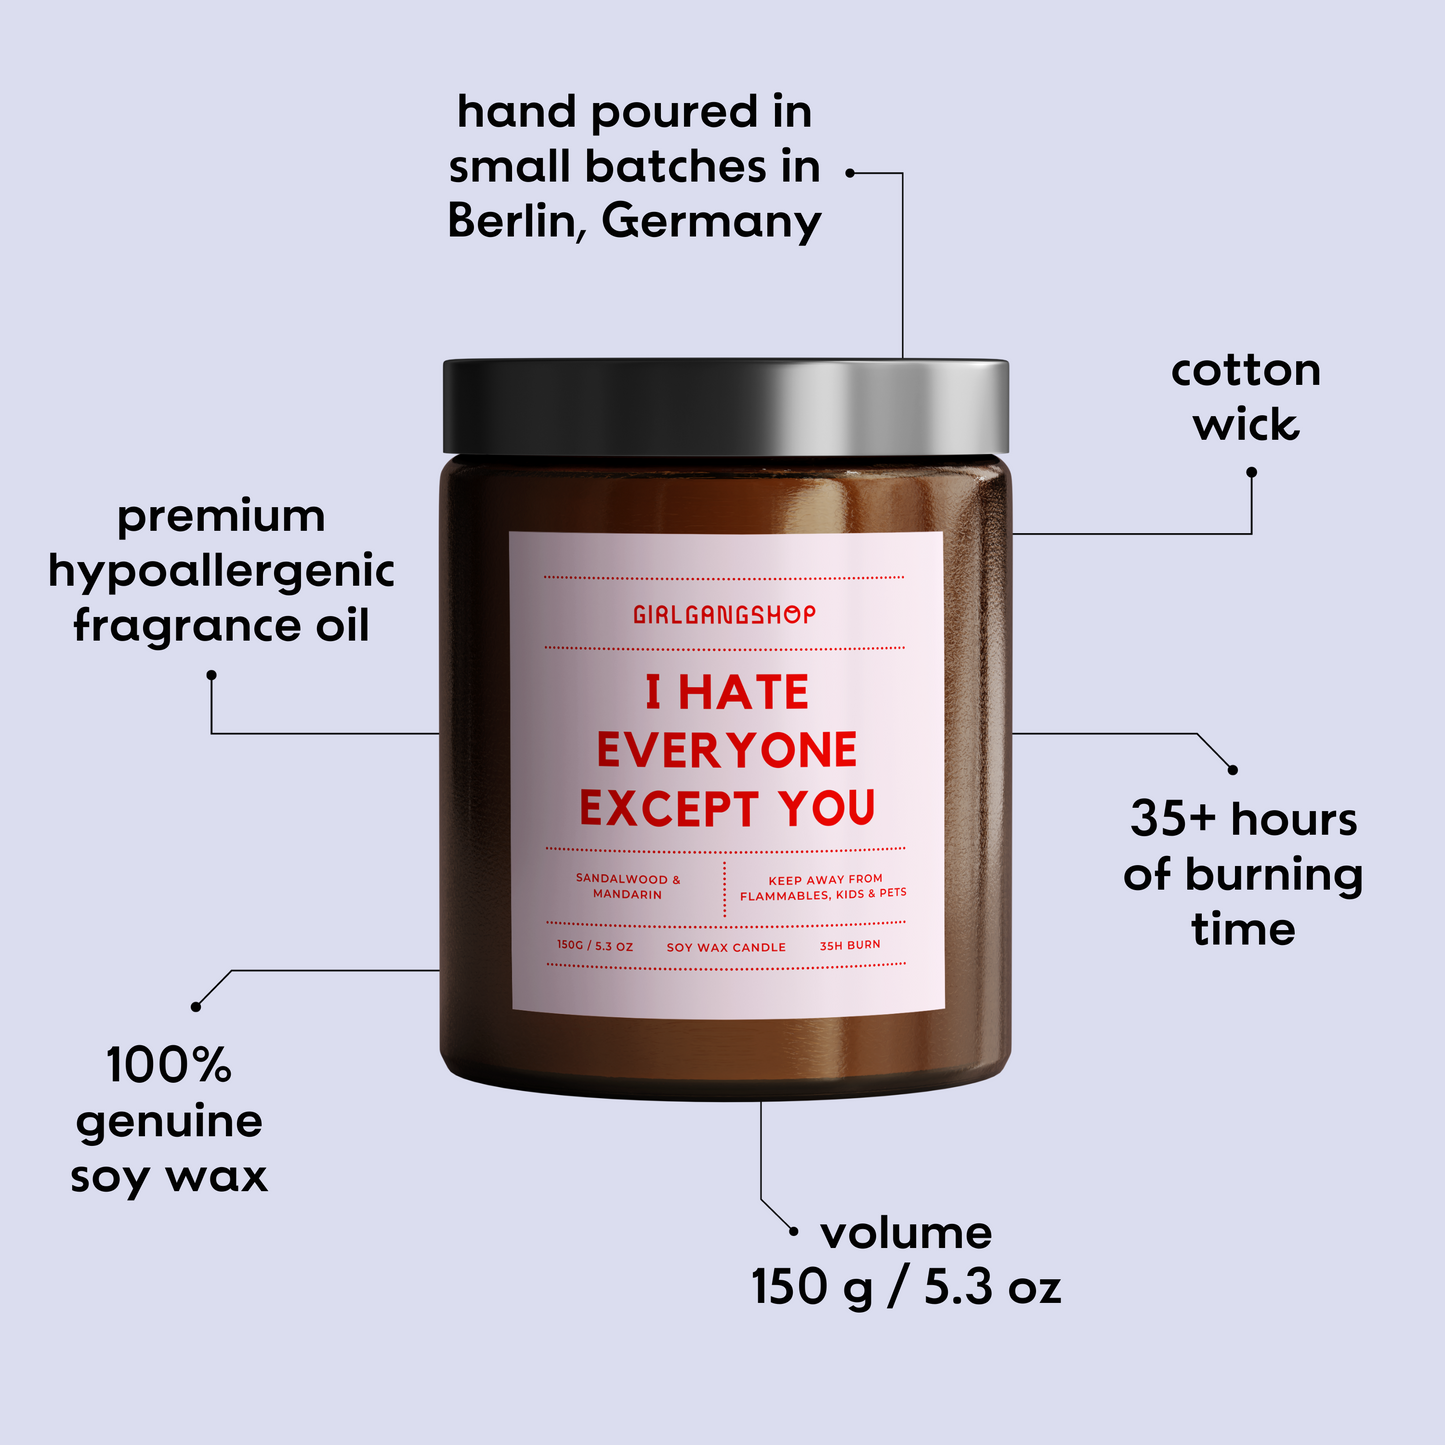 I Hate Everyone Except you Candle